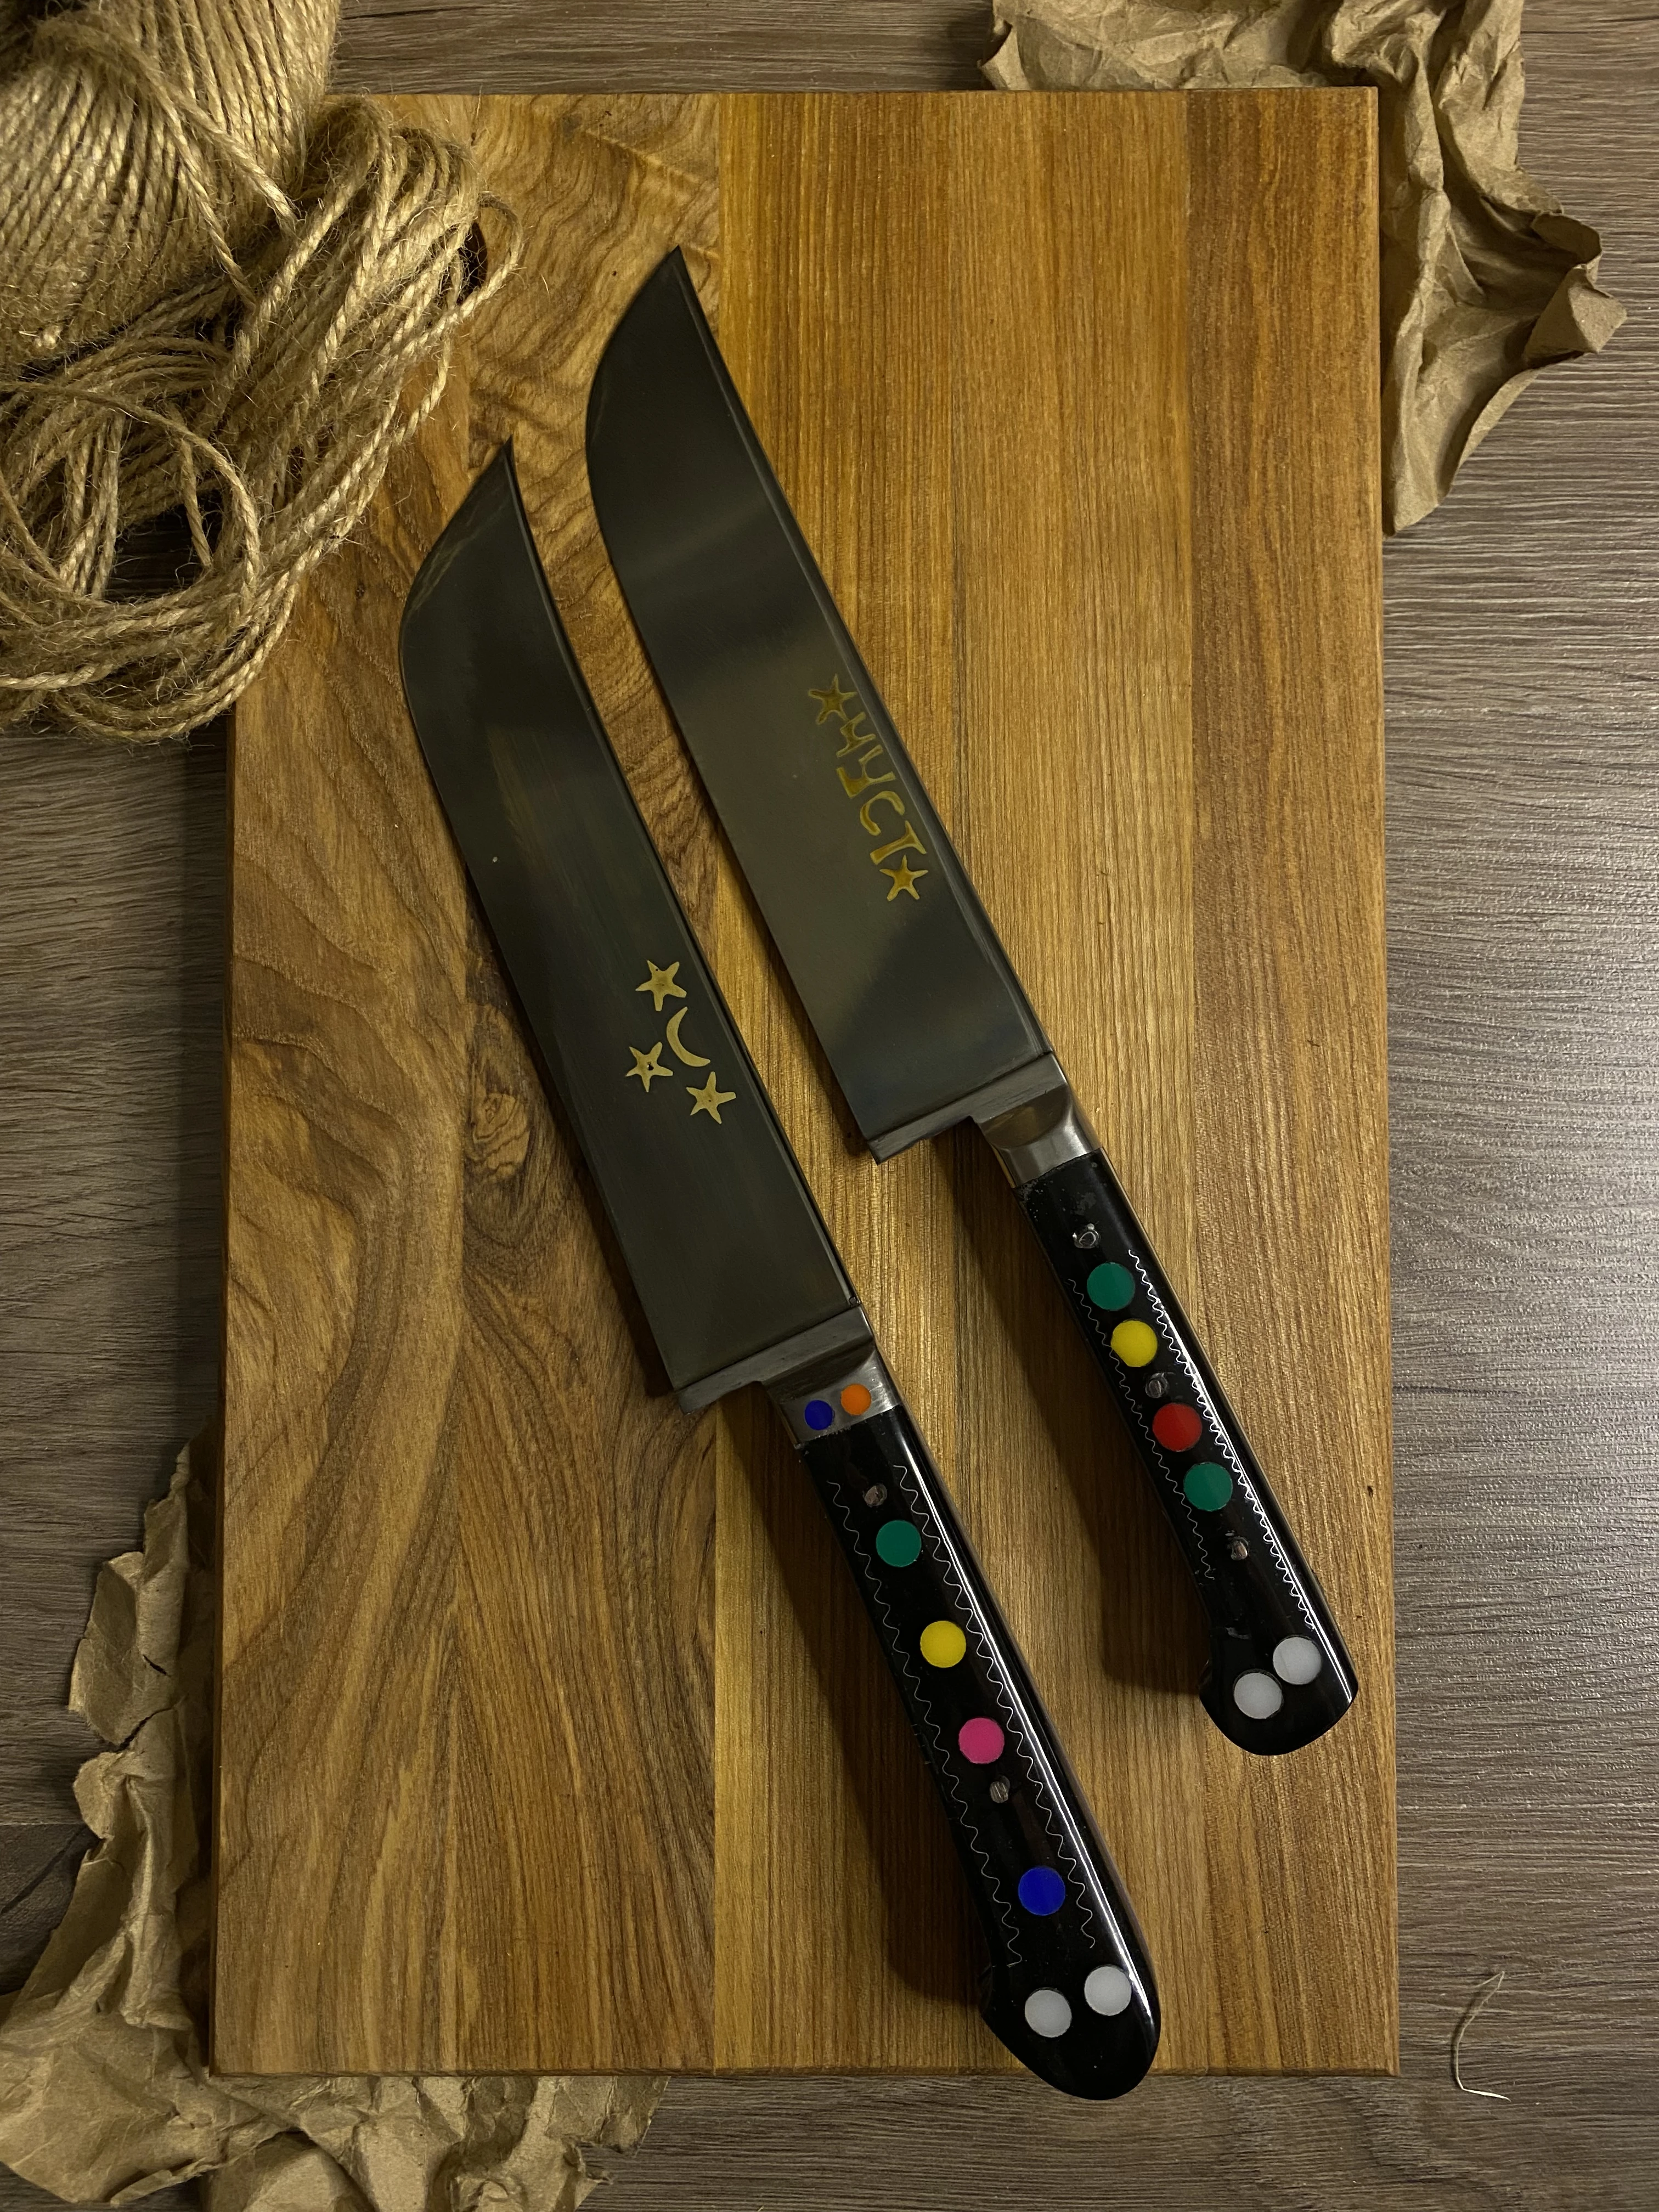 Uzbek Knife pcak up-16 kitchen knife pcak. Hand work. With scissors, for the kitchen for cooking meat and vegetables